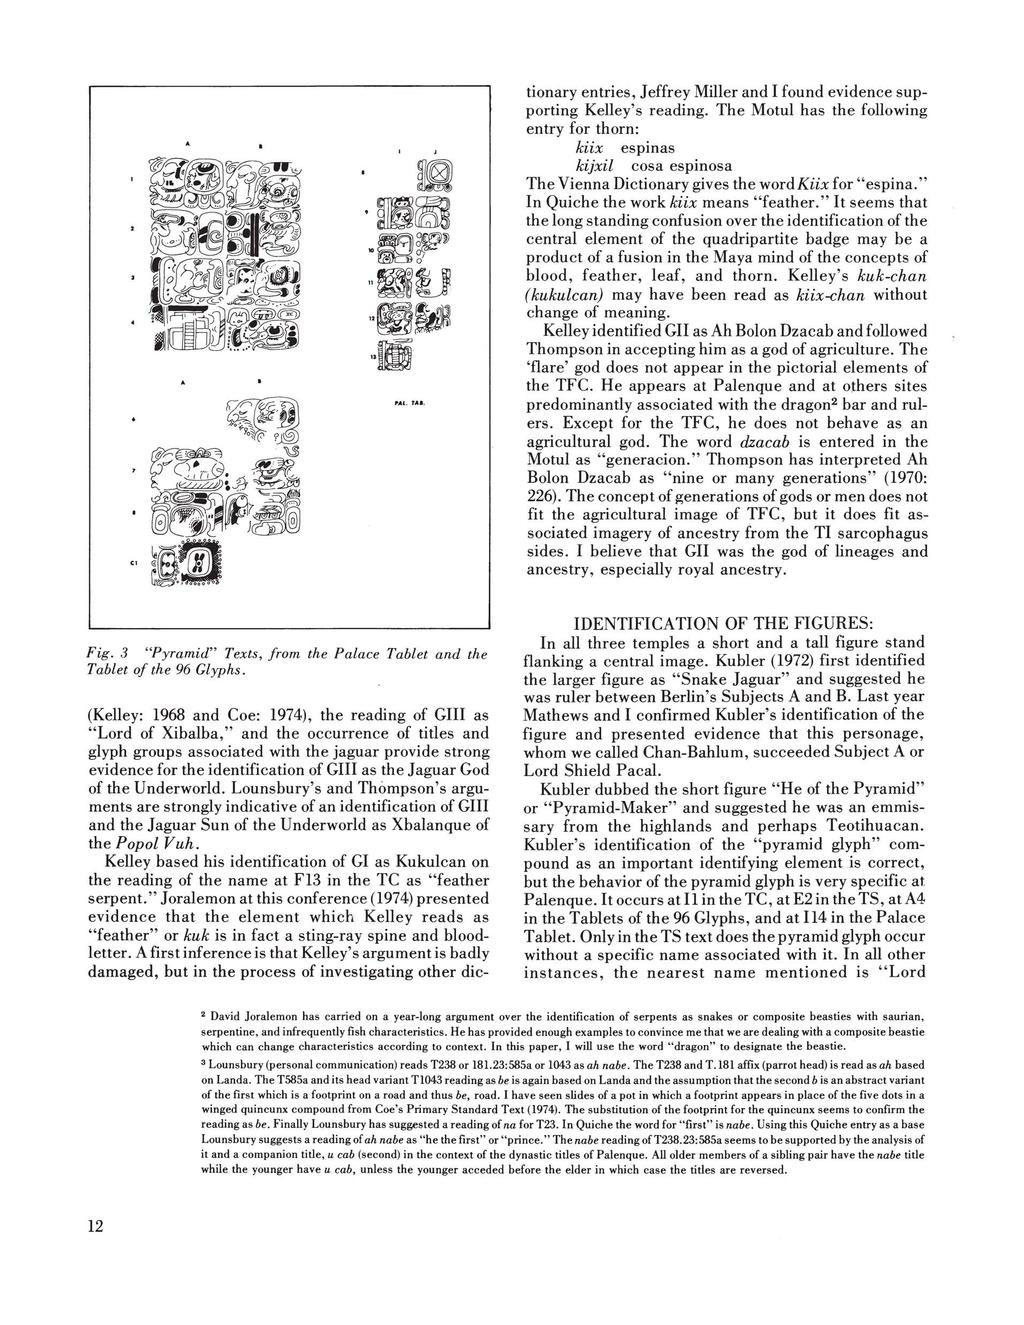 (Kelley: 1968 and Coe: 1974), the reading of GIll as "Lord of Xibalba," and the occurrence of titles and glyph groups associated with the jaguar provide strong evidence for the identification of GIll